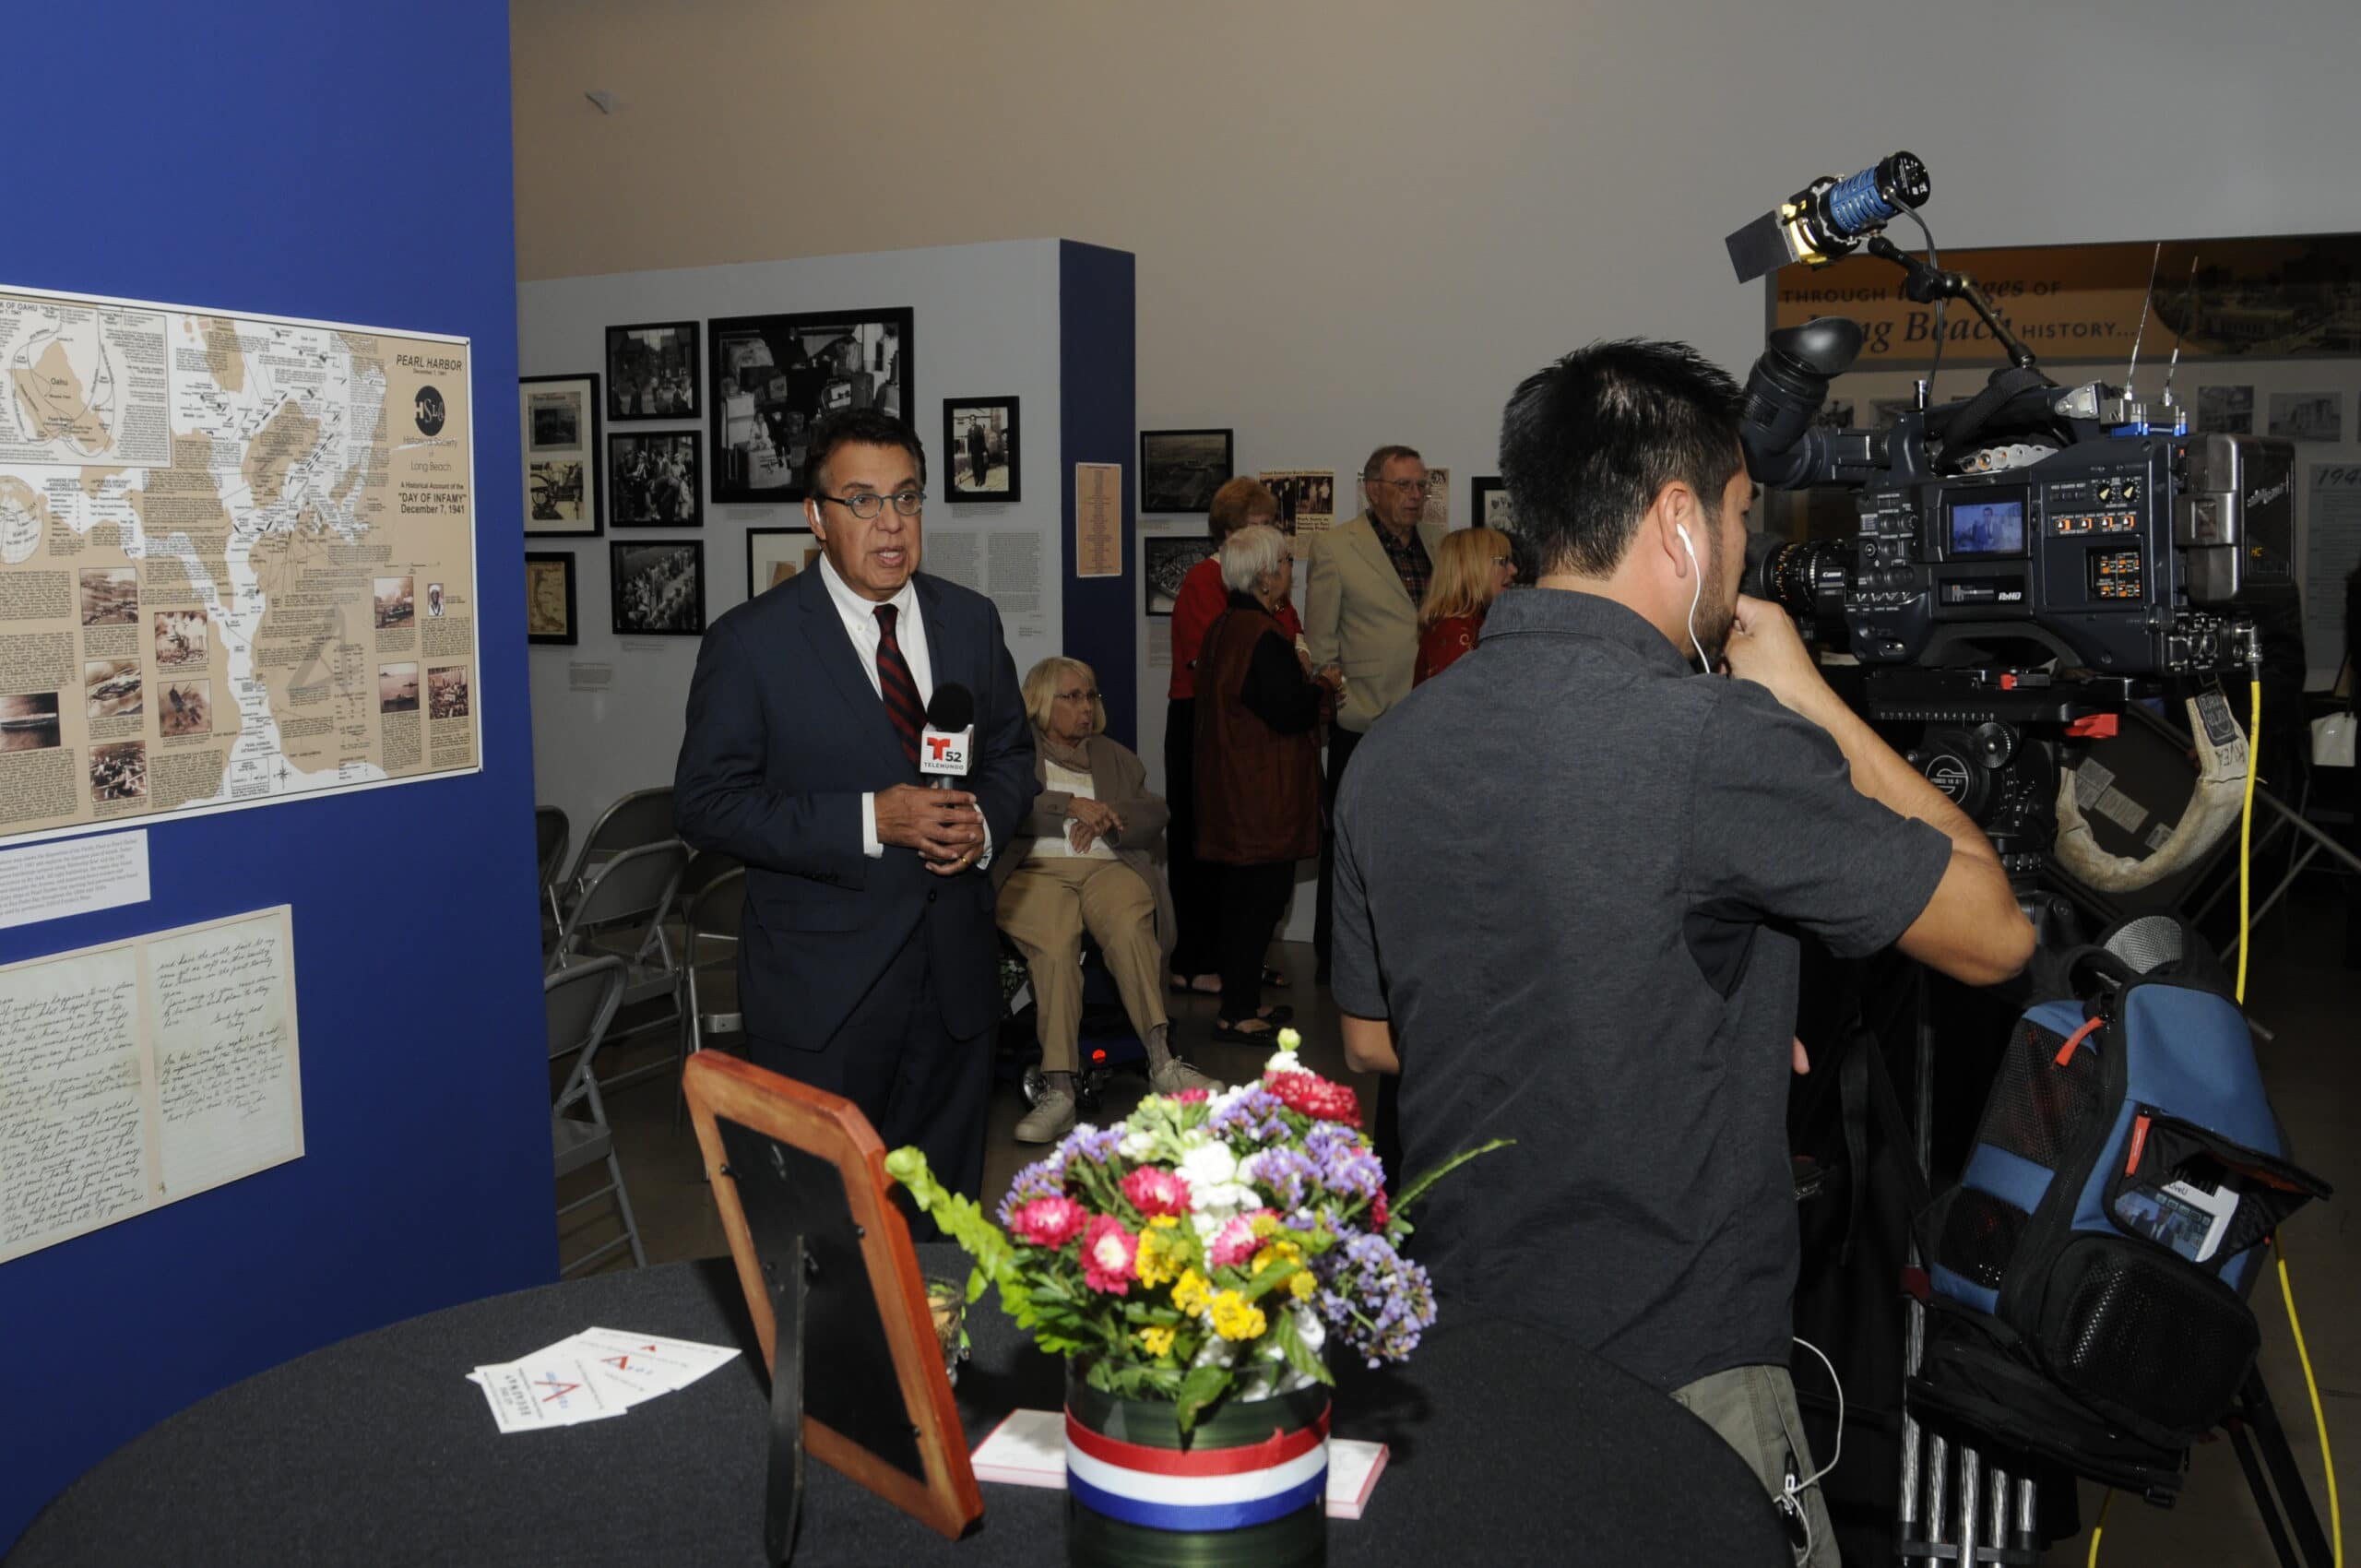 Long beach historical society pearl harbor opening reception interview